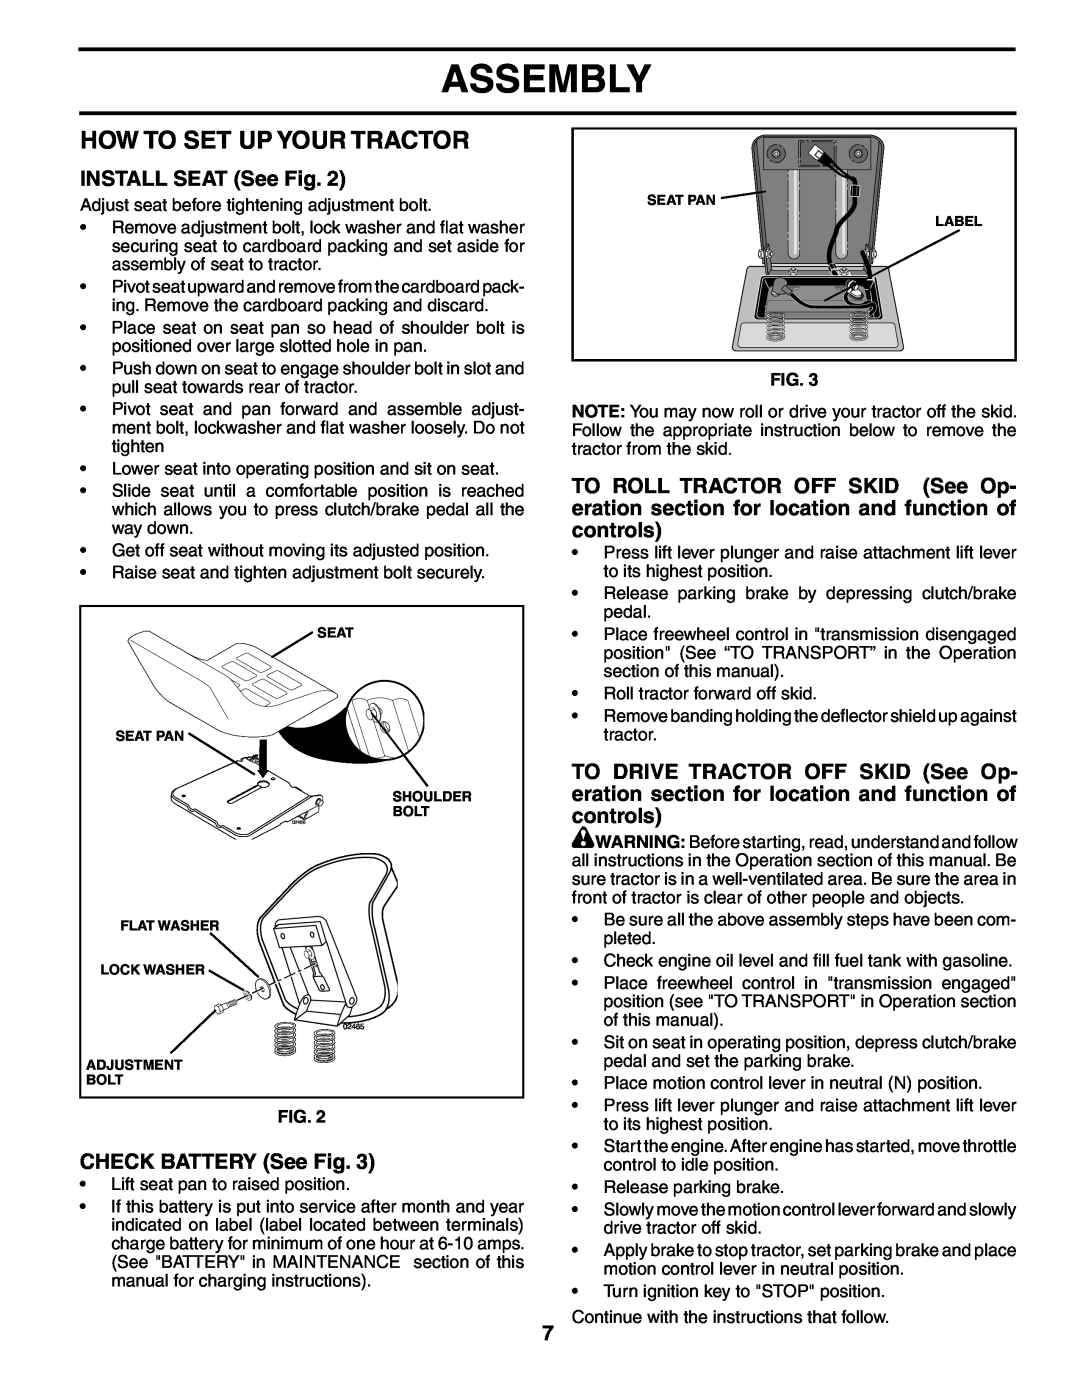 Poulan 187301 manual How To Set Up Your Tractor, INSTALL SEAT See Fig, CHECK BATTERY See Fig, Assembly 